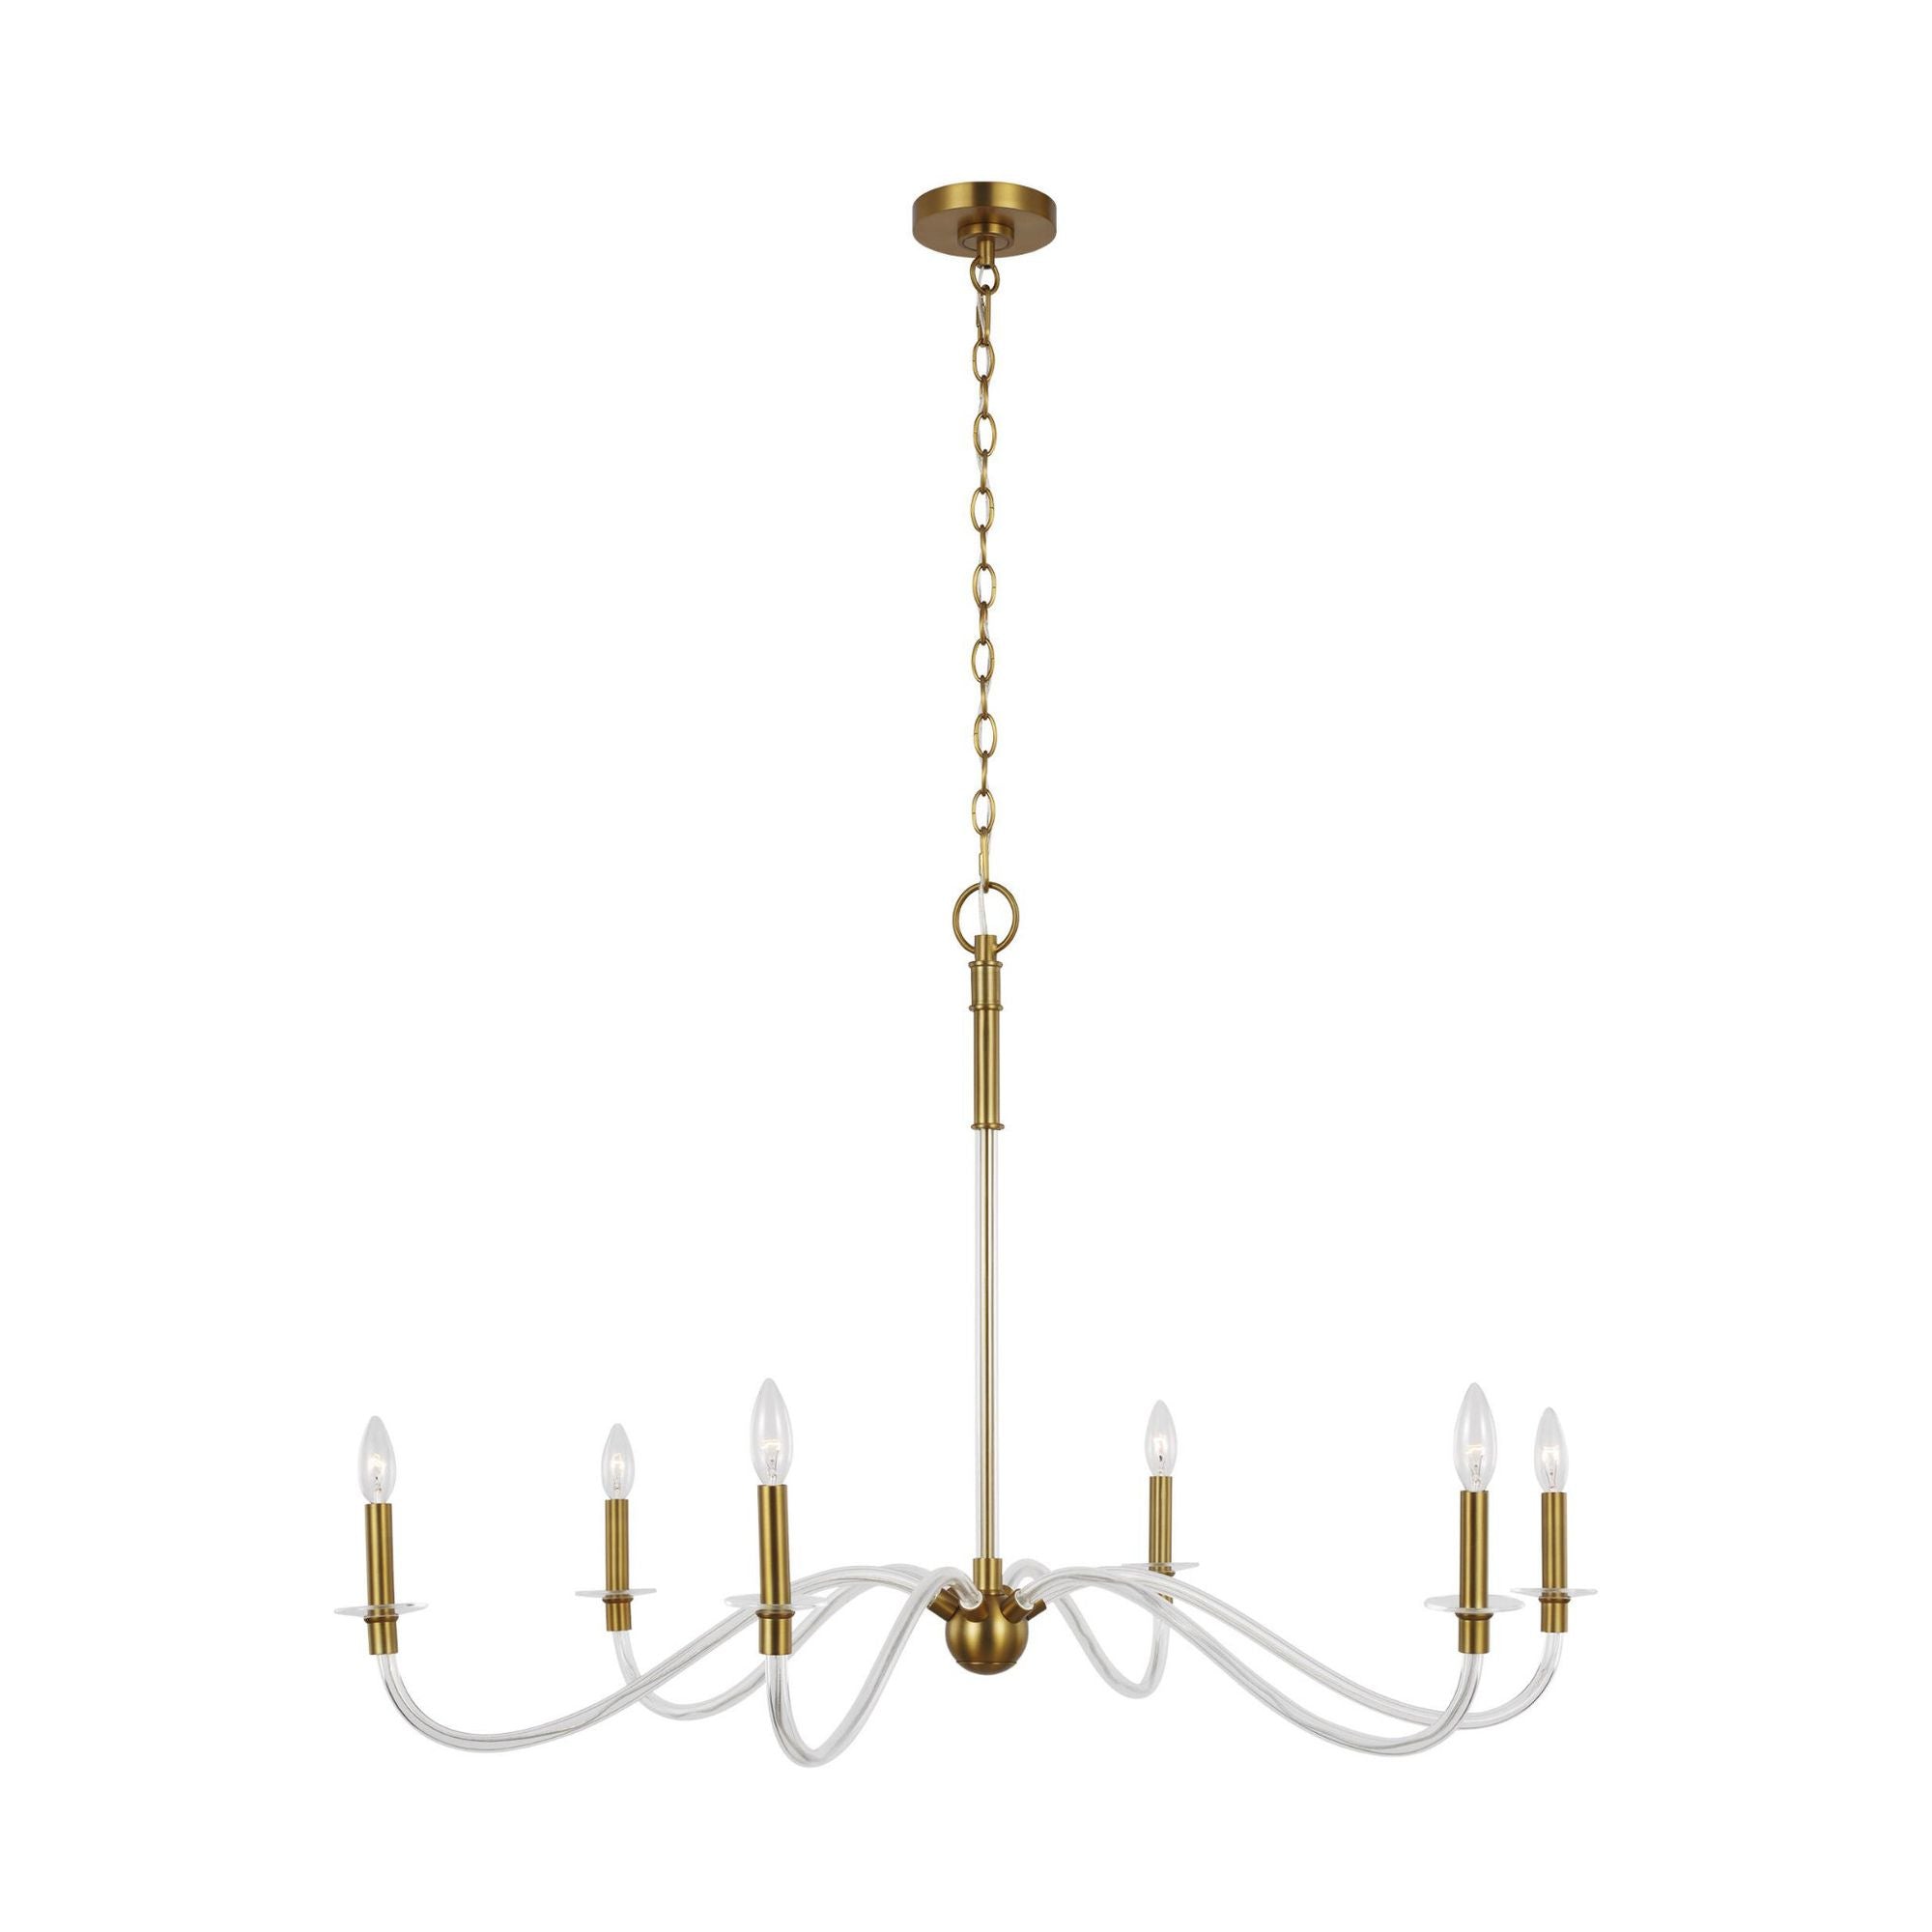 Chapman & Myers Hanover Large Chandelier in Burnished Brass